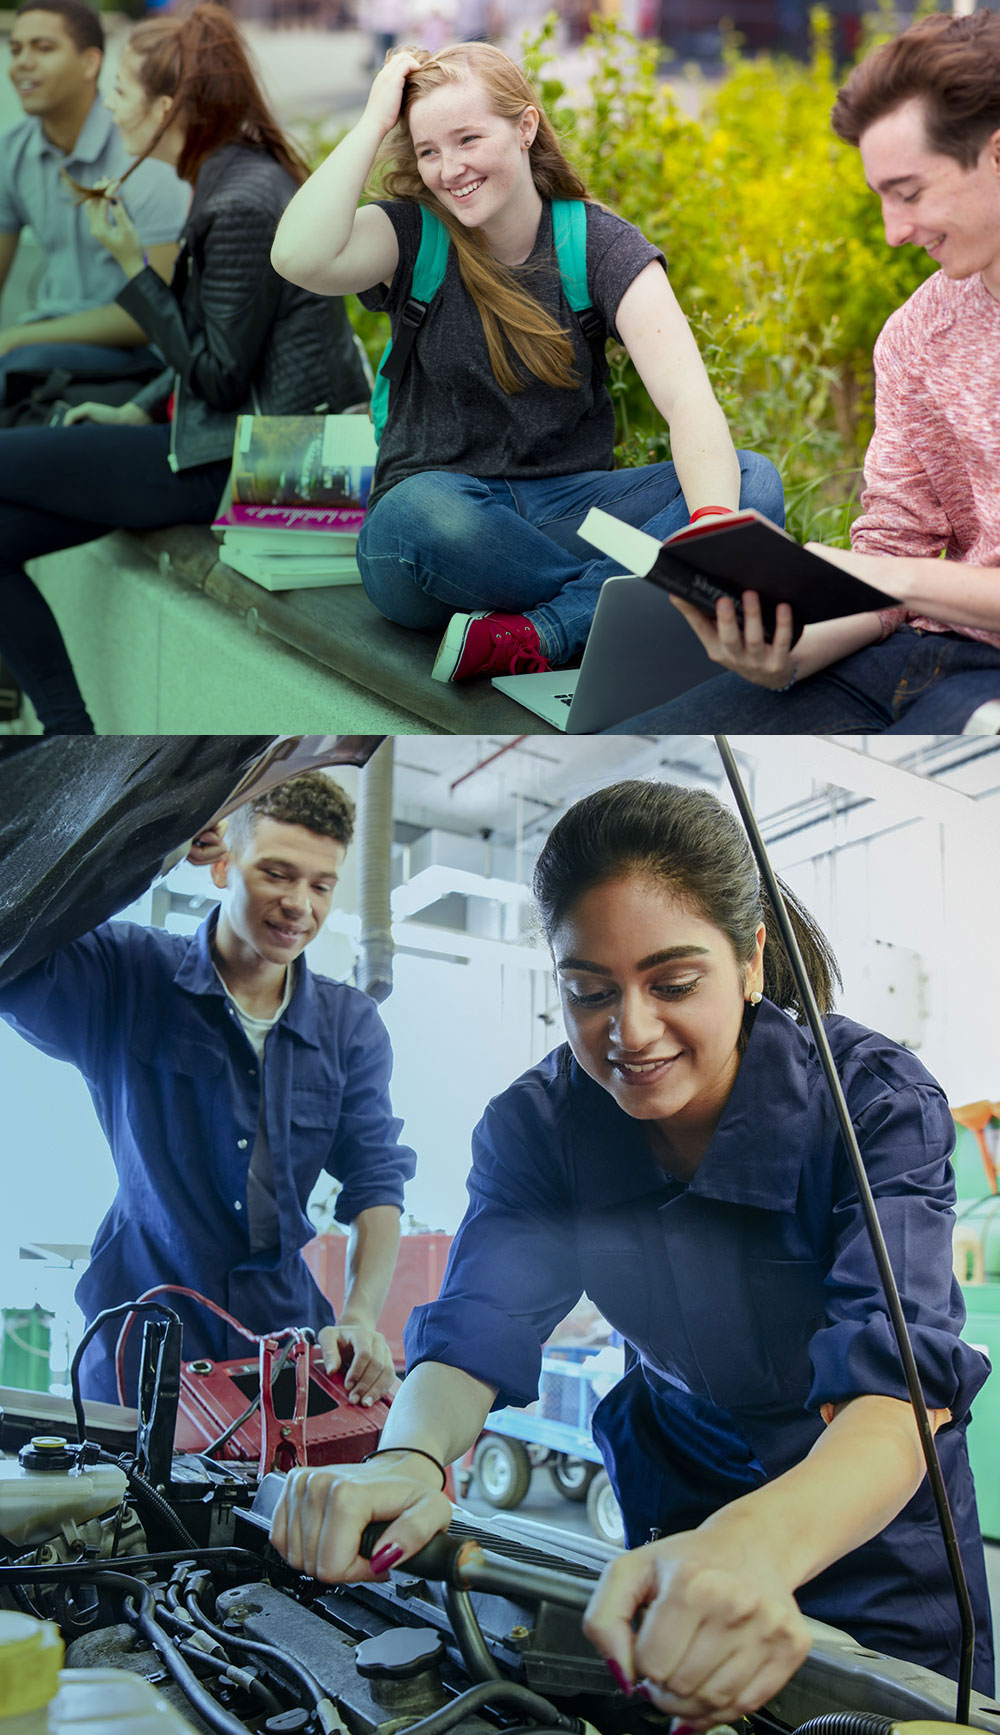 Students and mechanic apprentice image